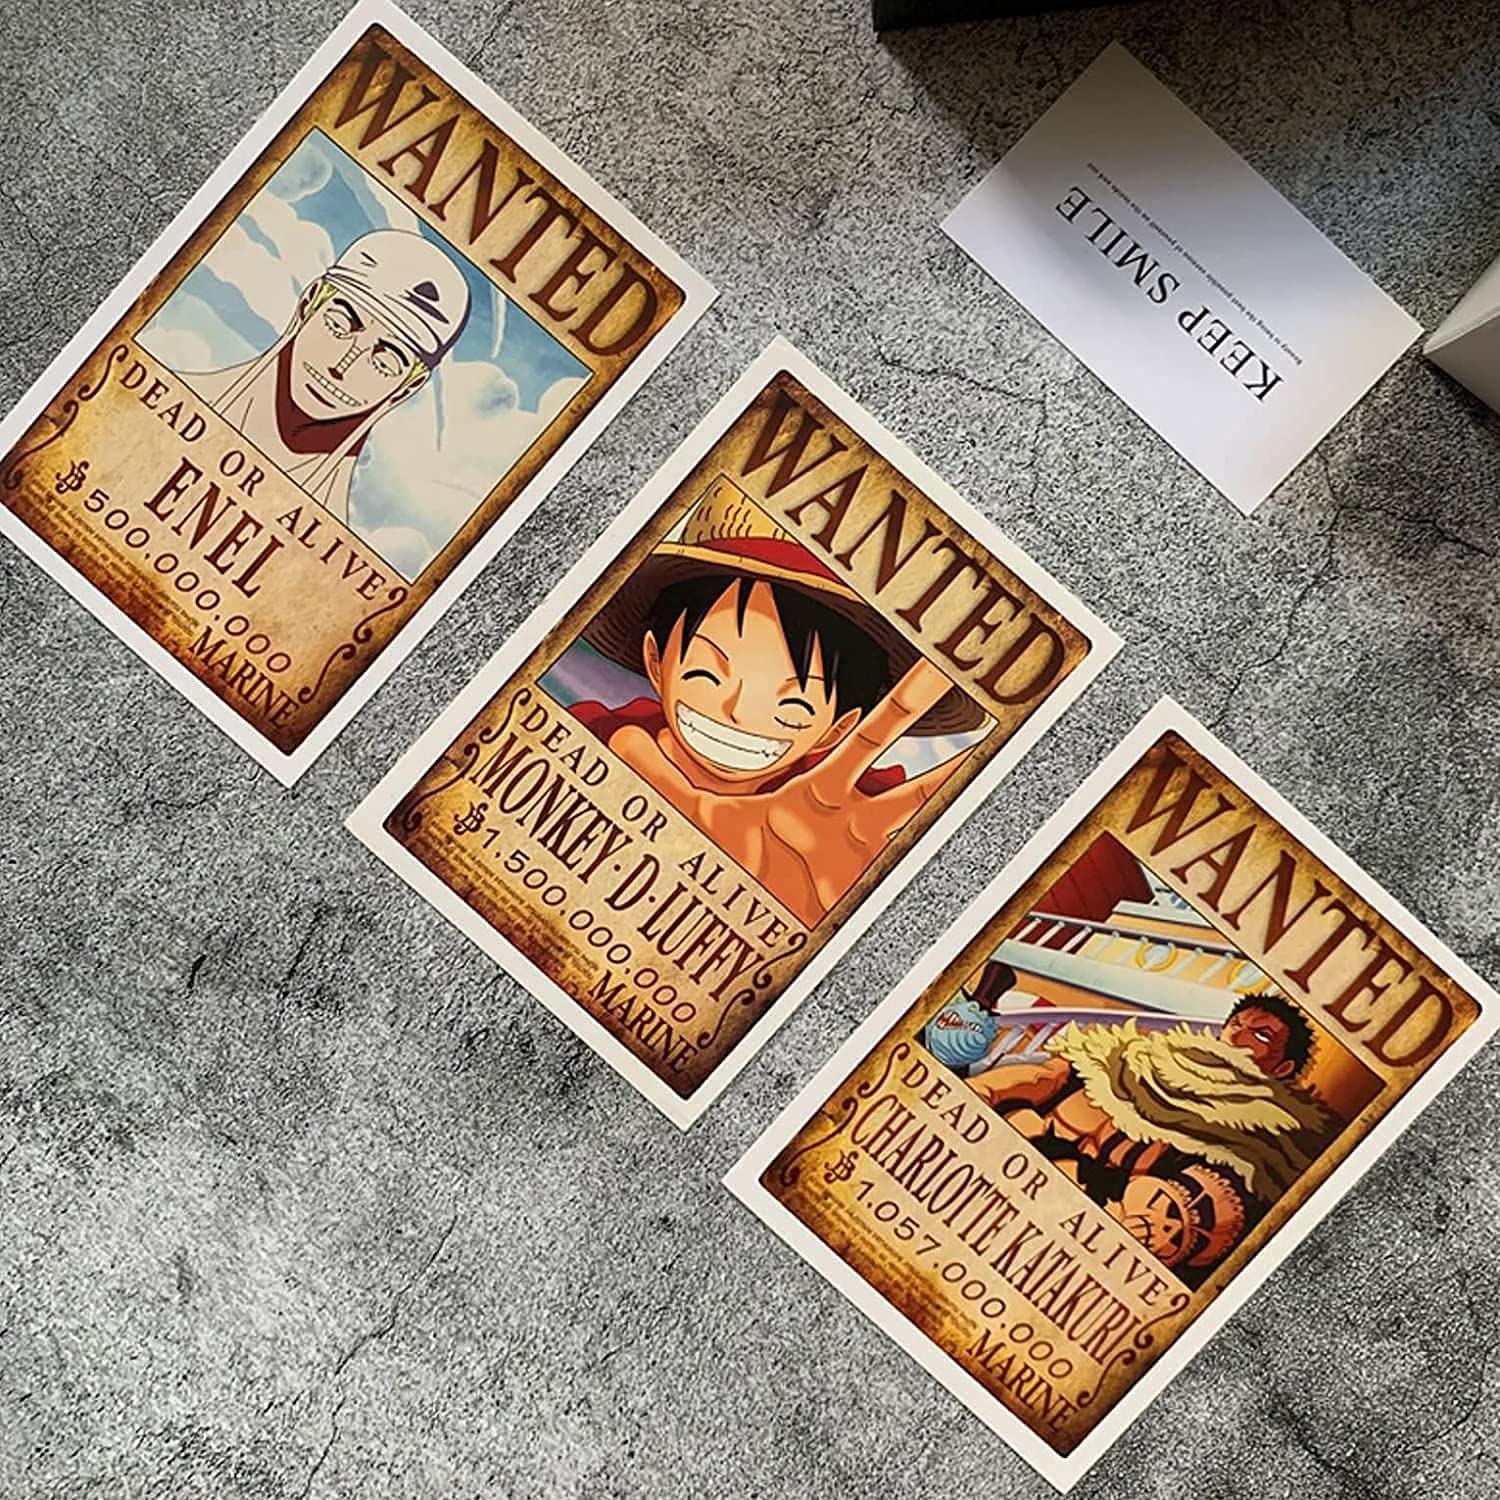 Buy One Piece Wanted Posters Postcards Boxed, Luffy Chopper Zoro Nami Usopp Sanji Jinbe Franky Brook Robin (100pcs )2 Online at Lowest Price in Japan. B095YYPQ4C